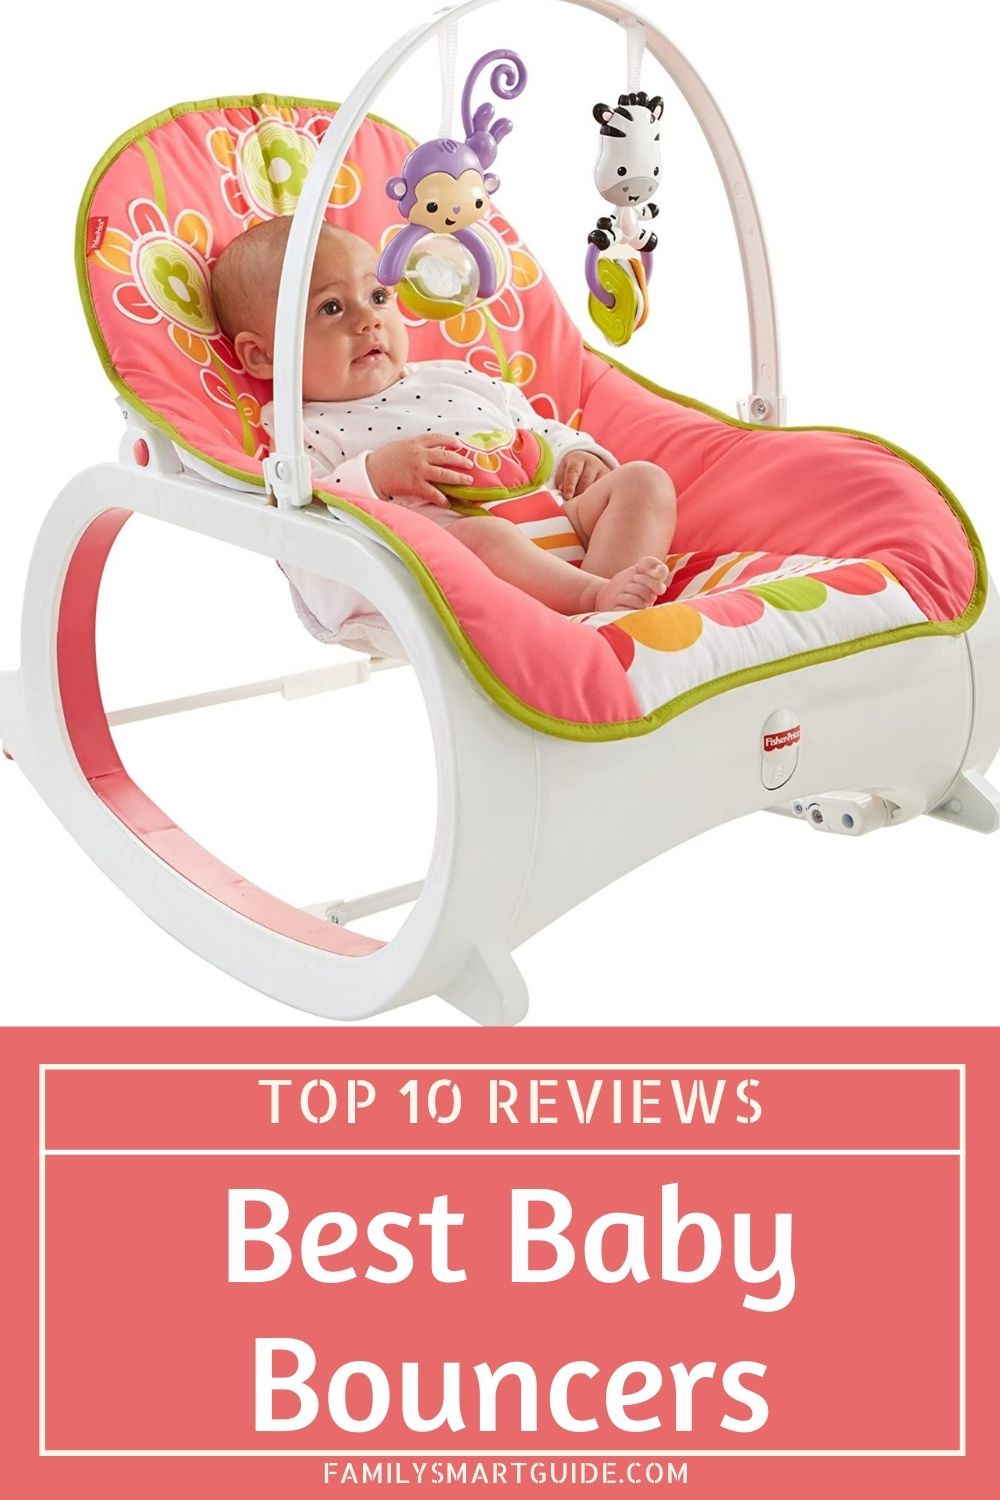 Top 10 Best Baby Bouncers Reviews